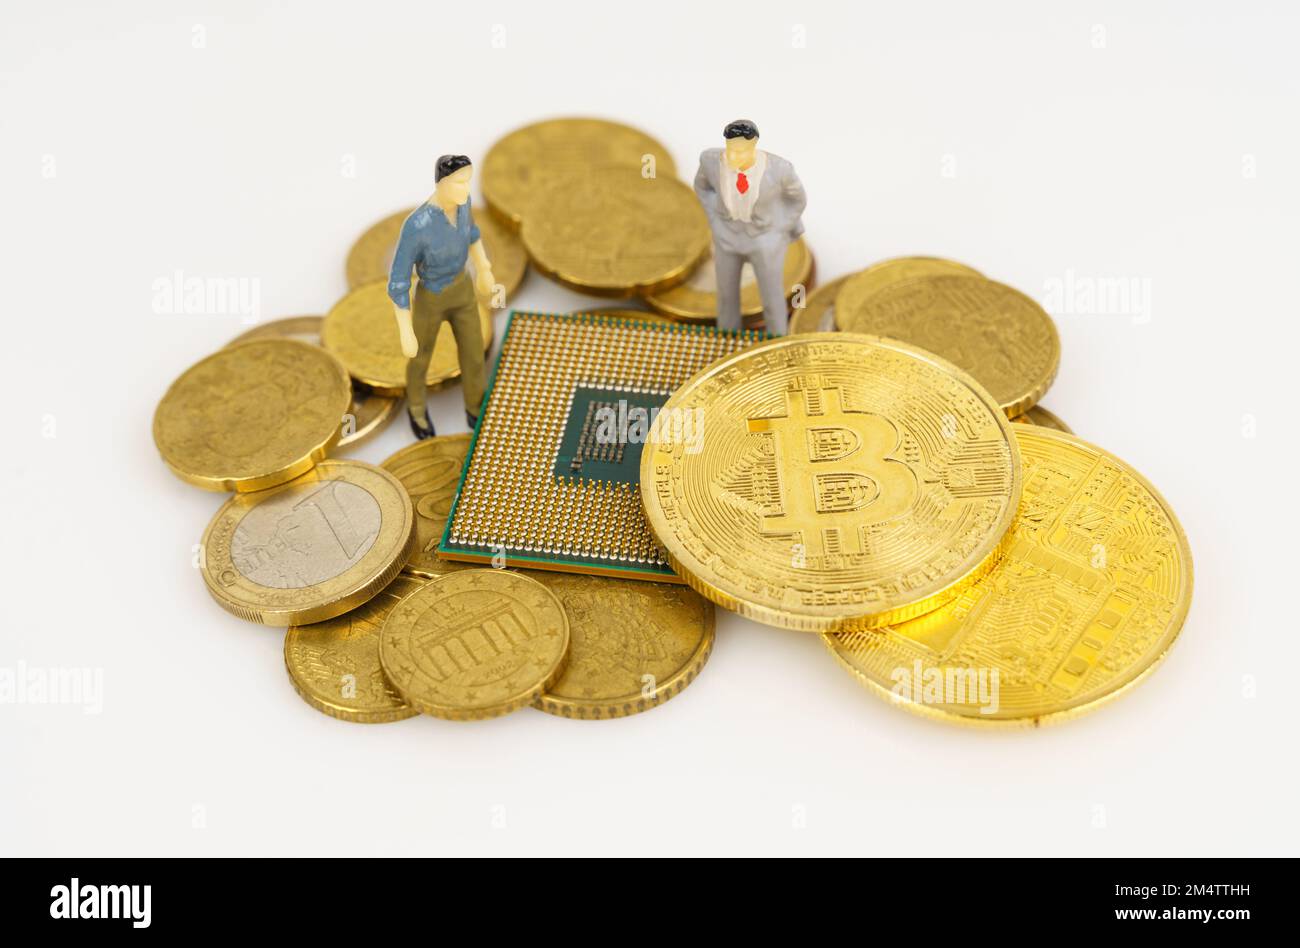 Cryptocurrency and business concept. On a white surface are coins, a processor, bitcoin and miniature figures of people. Stock Photo